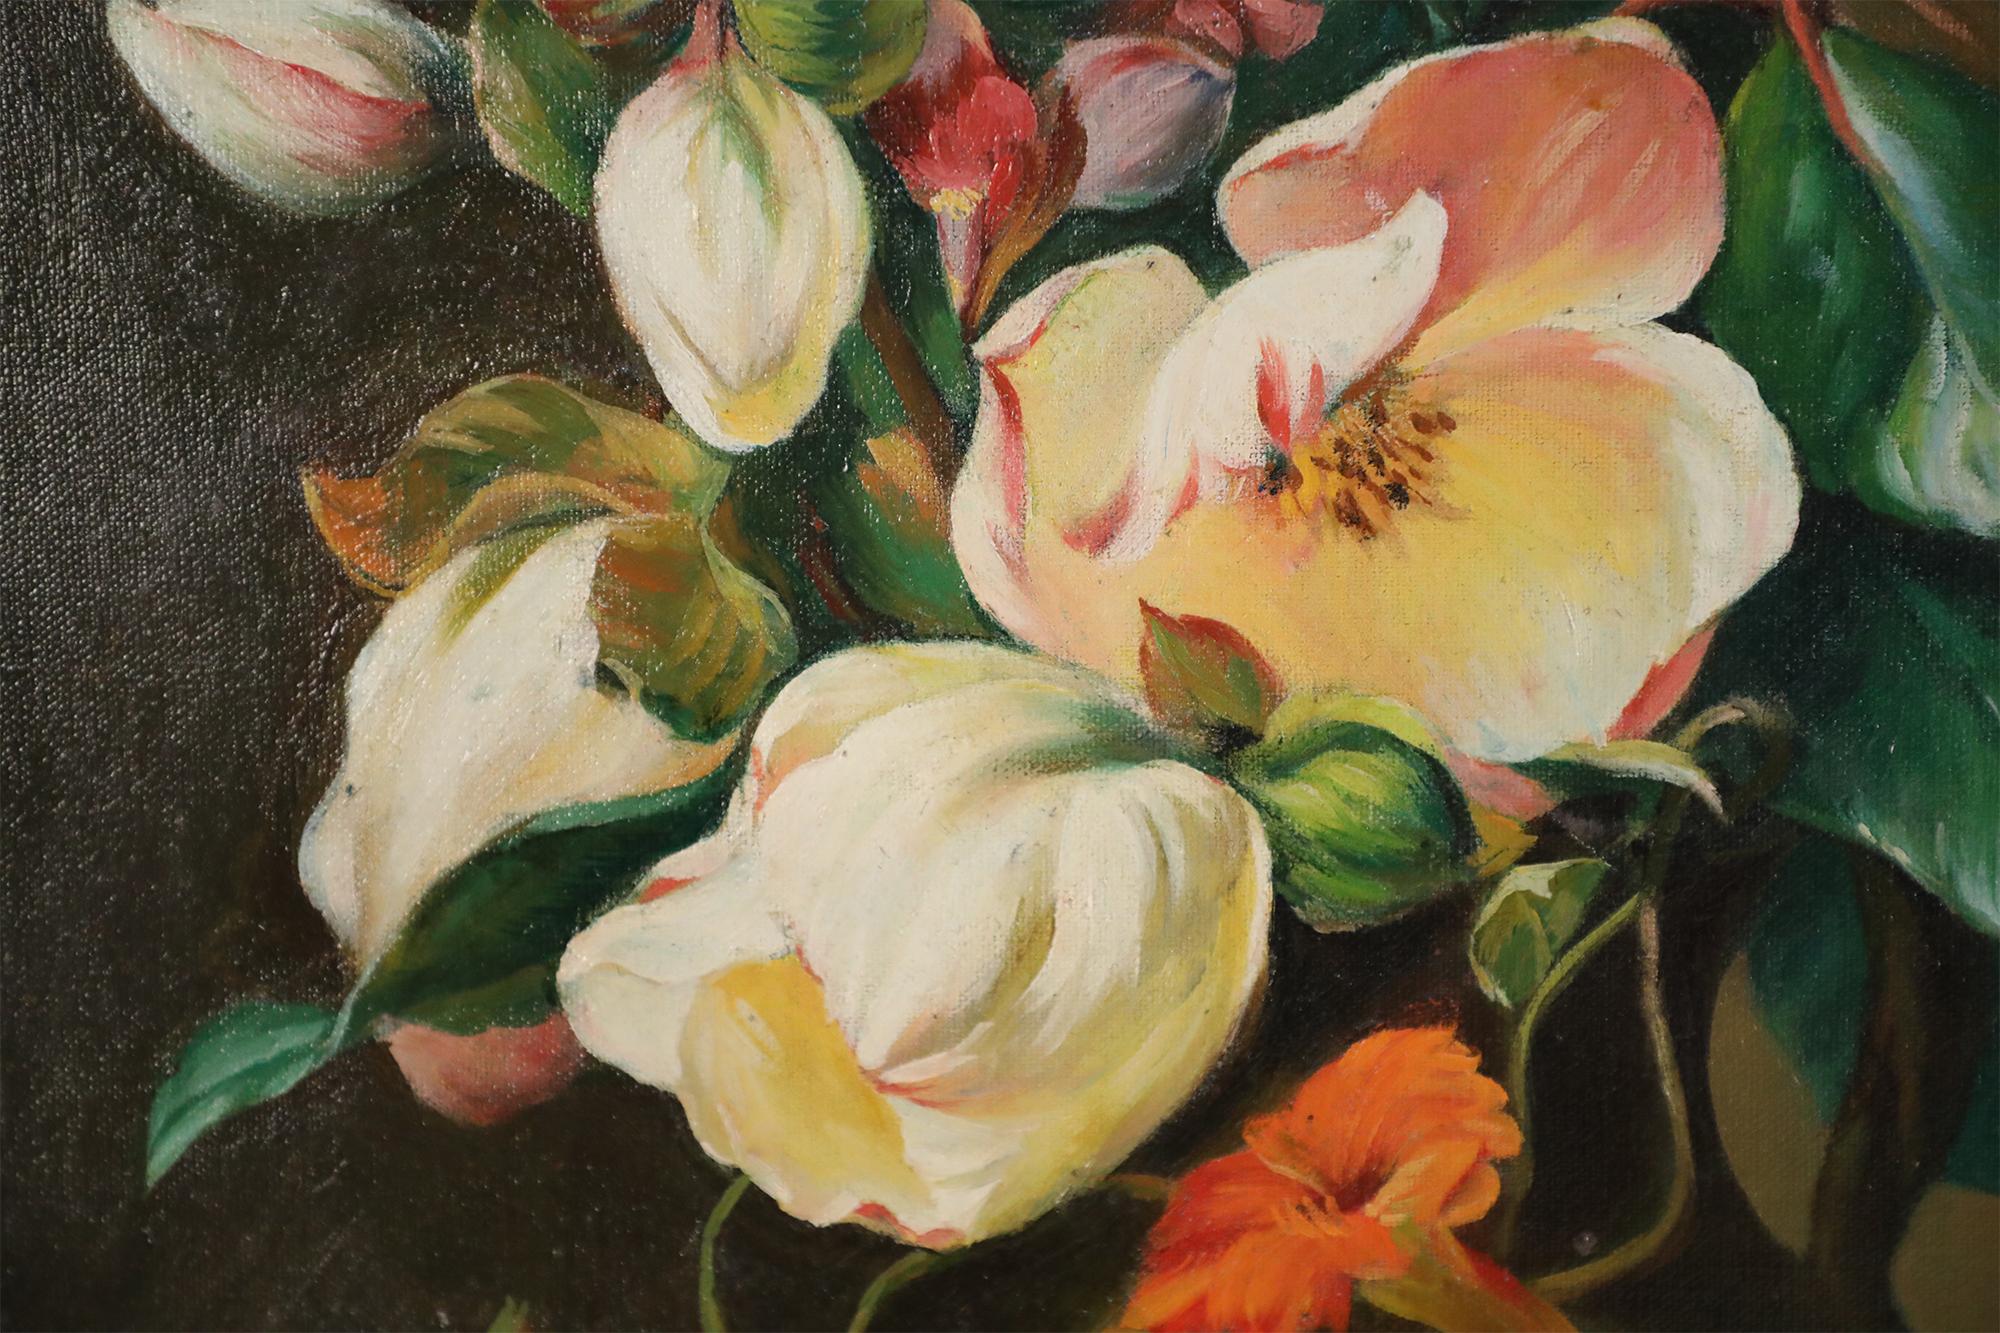 Oiled White and Pink Floral Arrangement Still Life Painting on Canvas For Sale